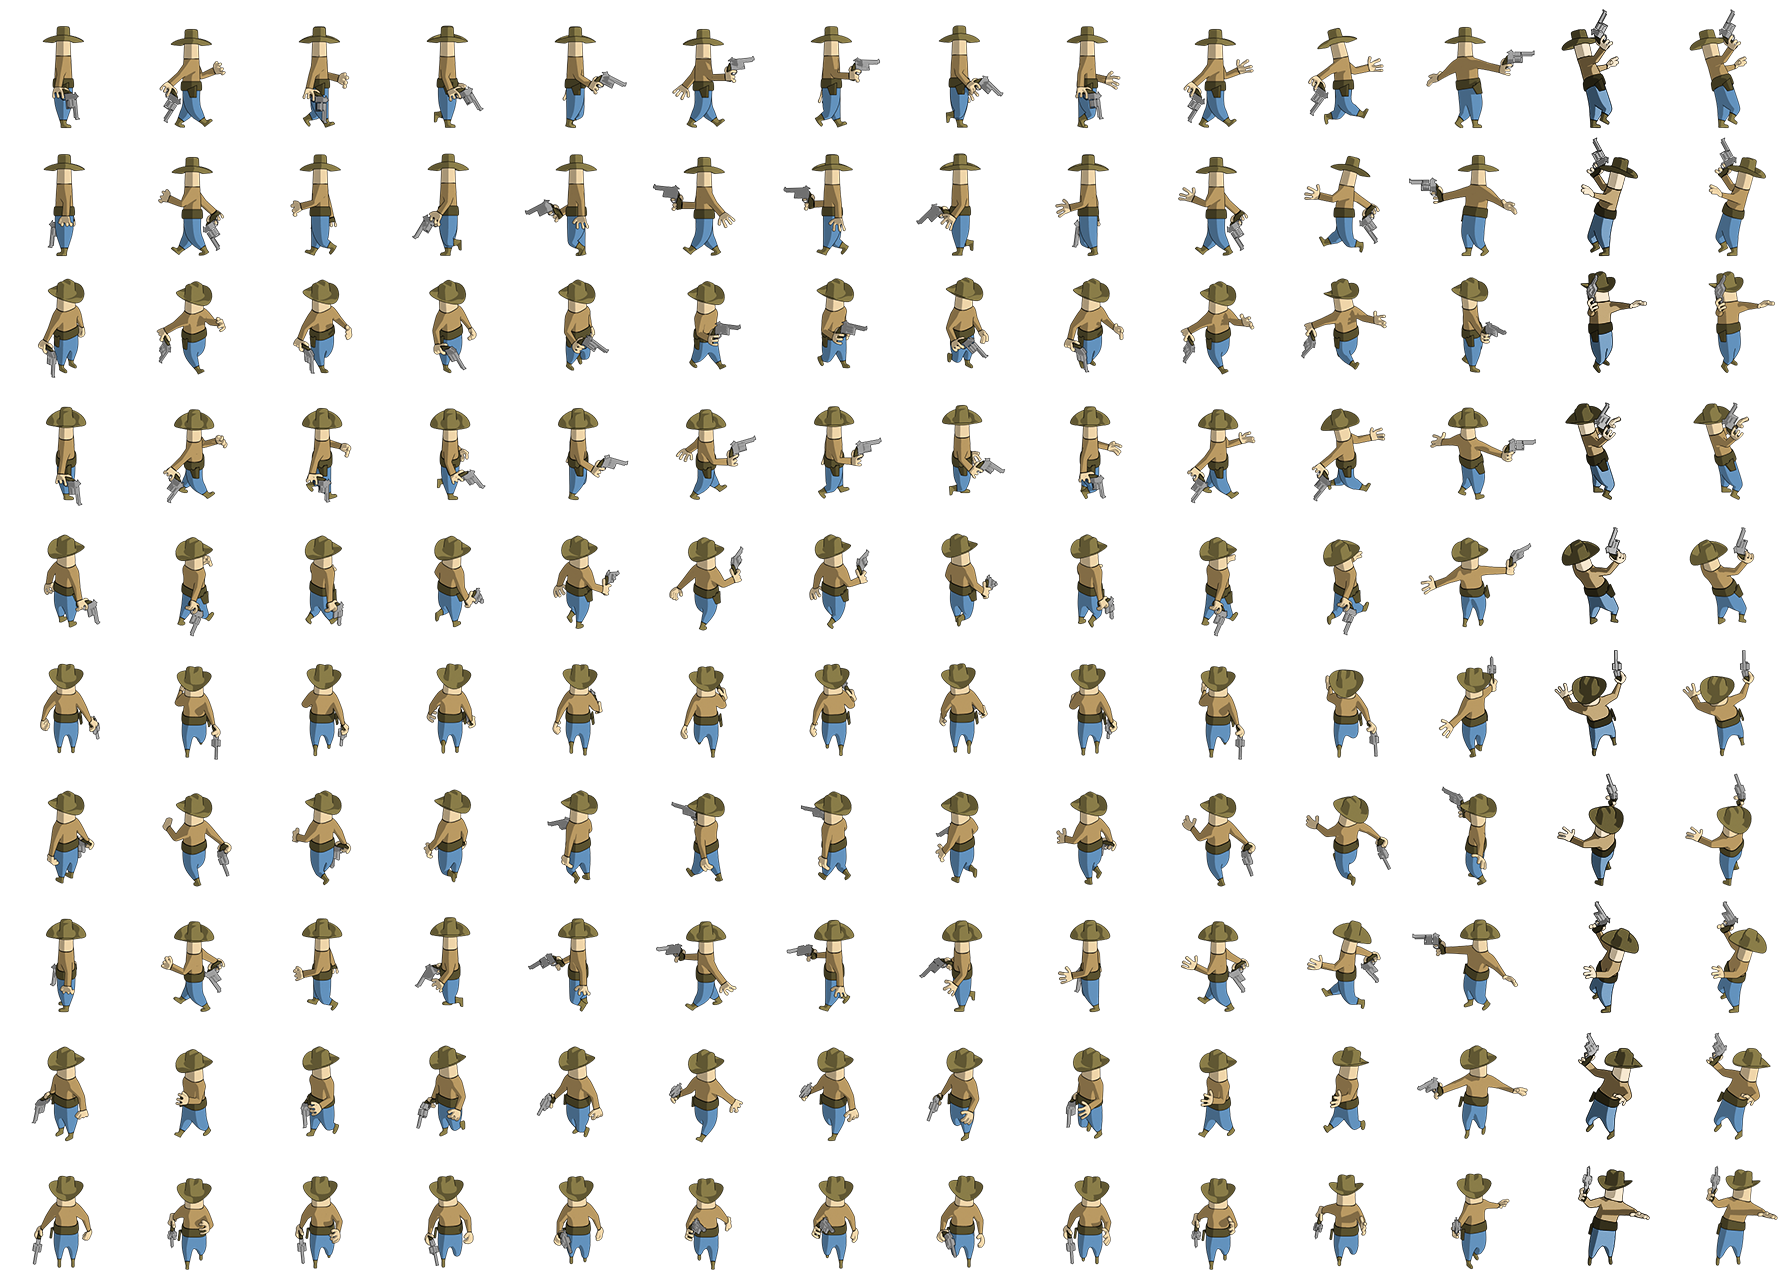 Cowboy Platform and Isometric Sprite Sheet | OpenGameArt.org